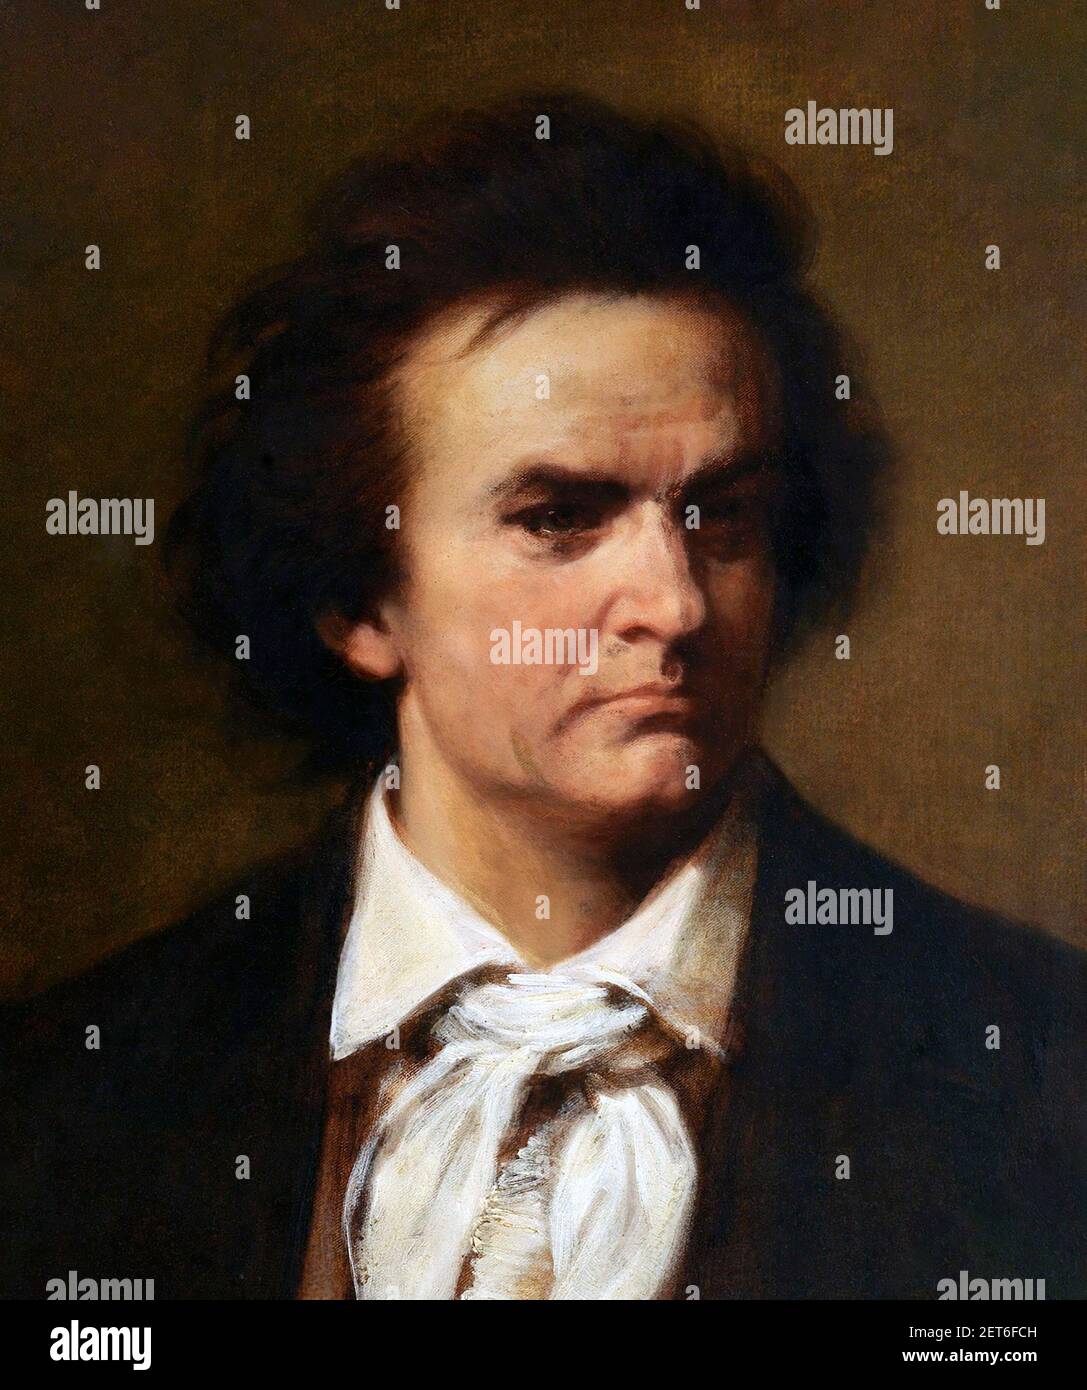 Beethoven; Portrait of the German composer, Ludwig van Beethoven (1770-1827) by Henry Ulke, oil on canvas, 1875 Stock Photo